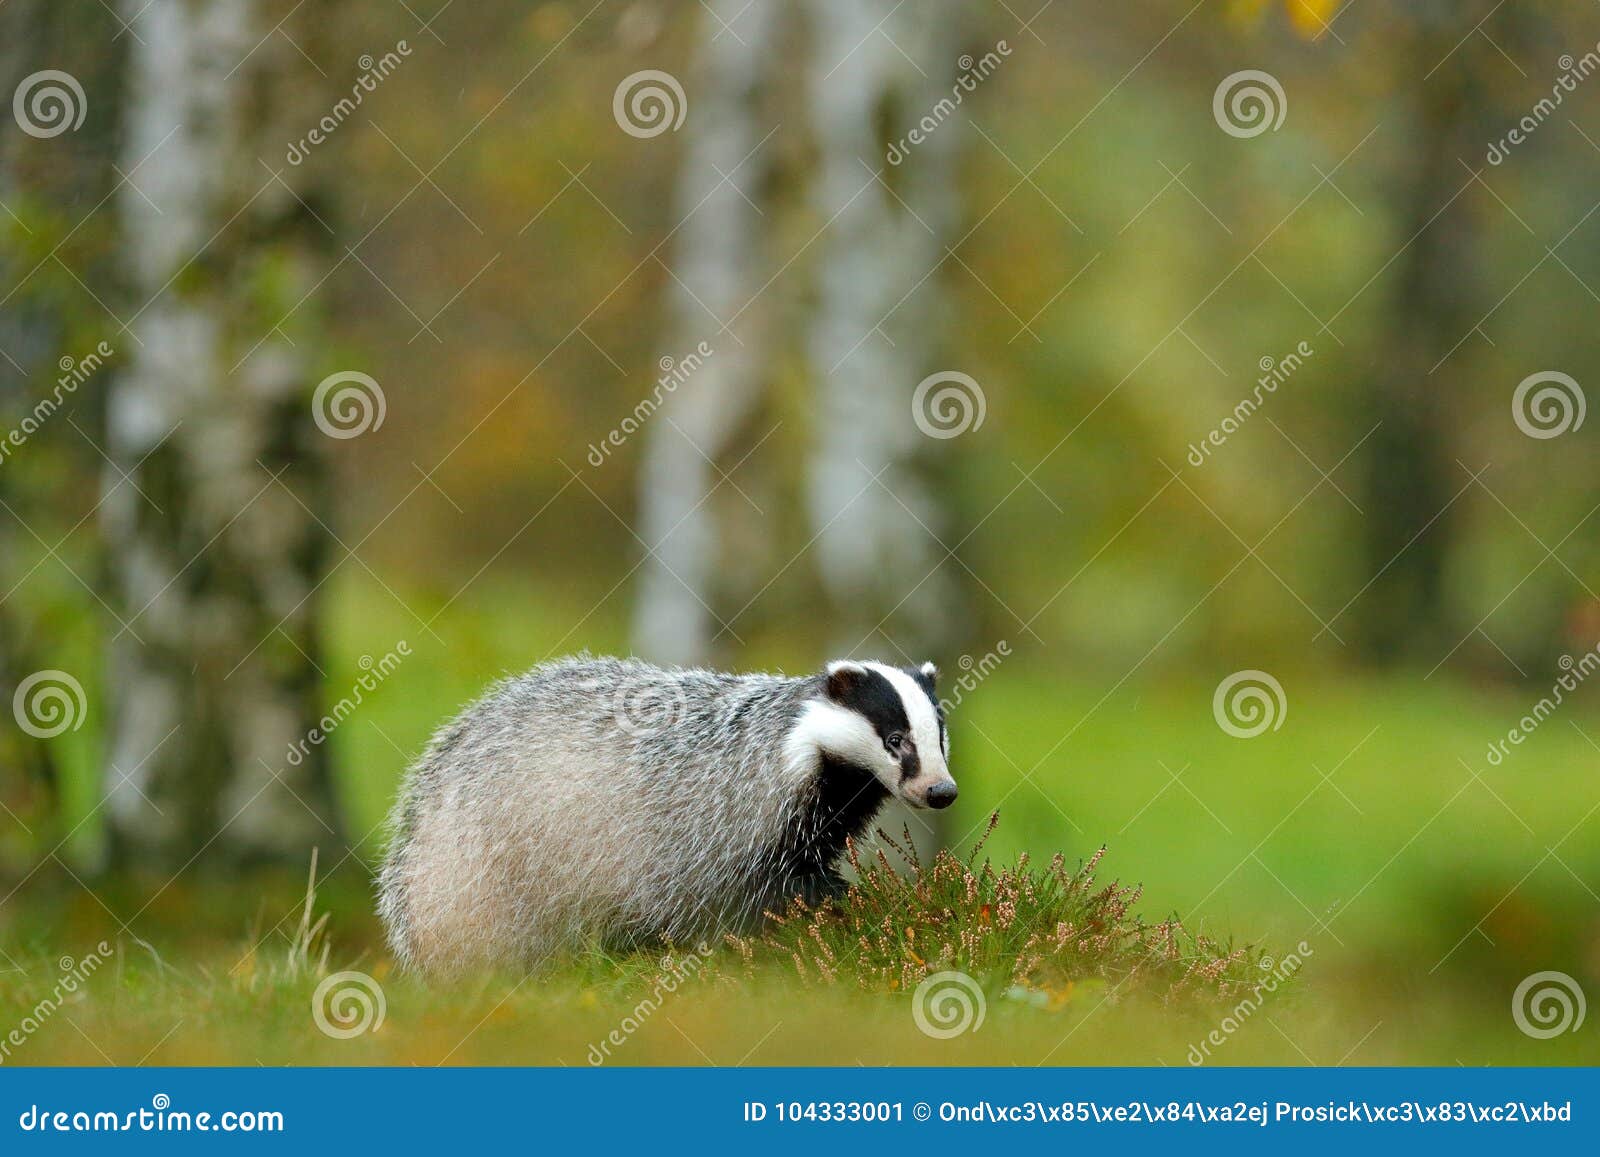 european badger, autumn larch green forest. mammal environment, rainy day. badger in forest, animal nature habitat, germany, europ